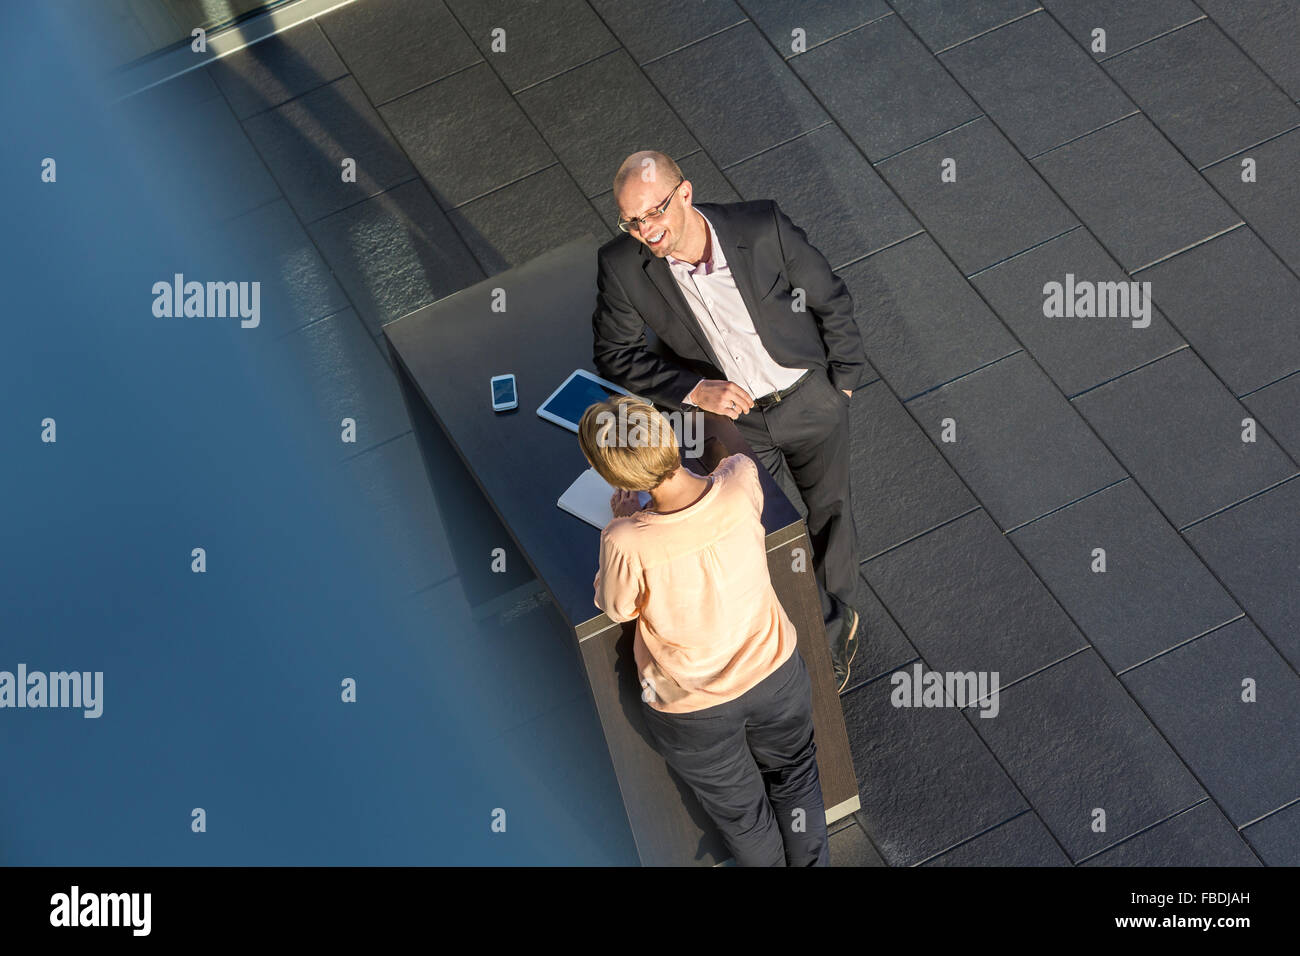 Business women and man discussing on bar table, elevated view Stock Photo